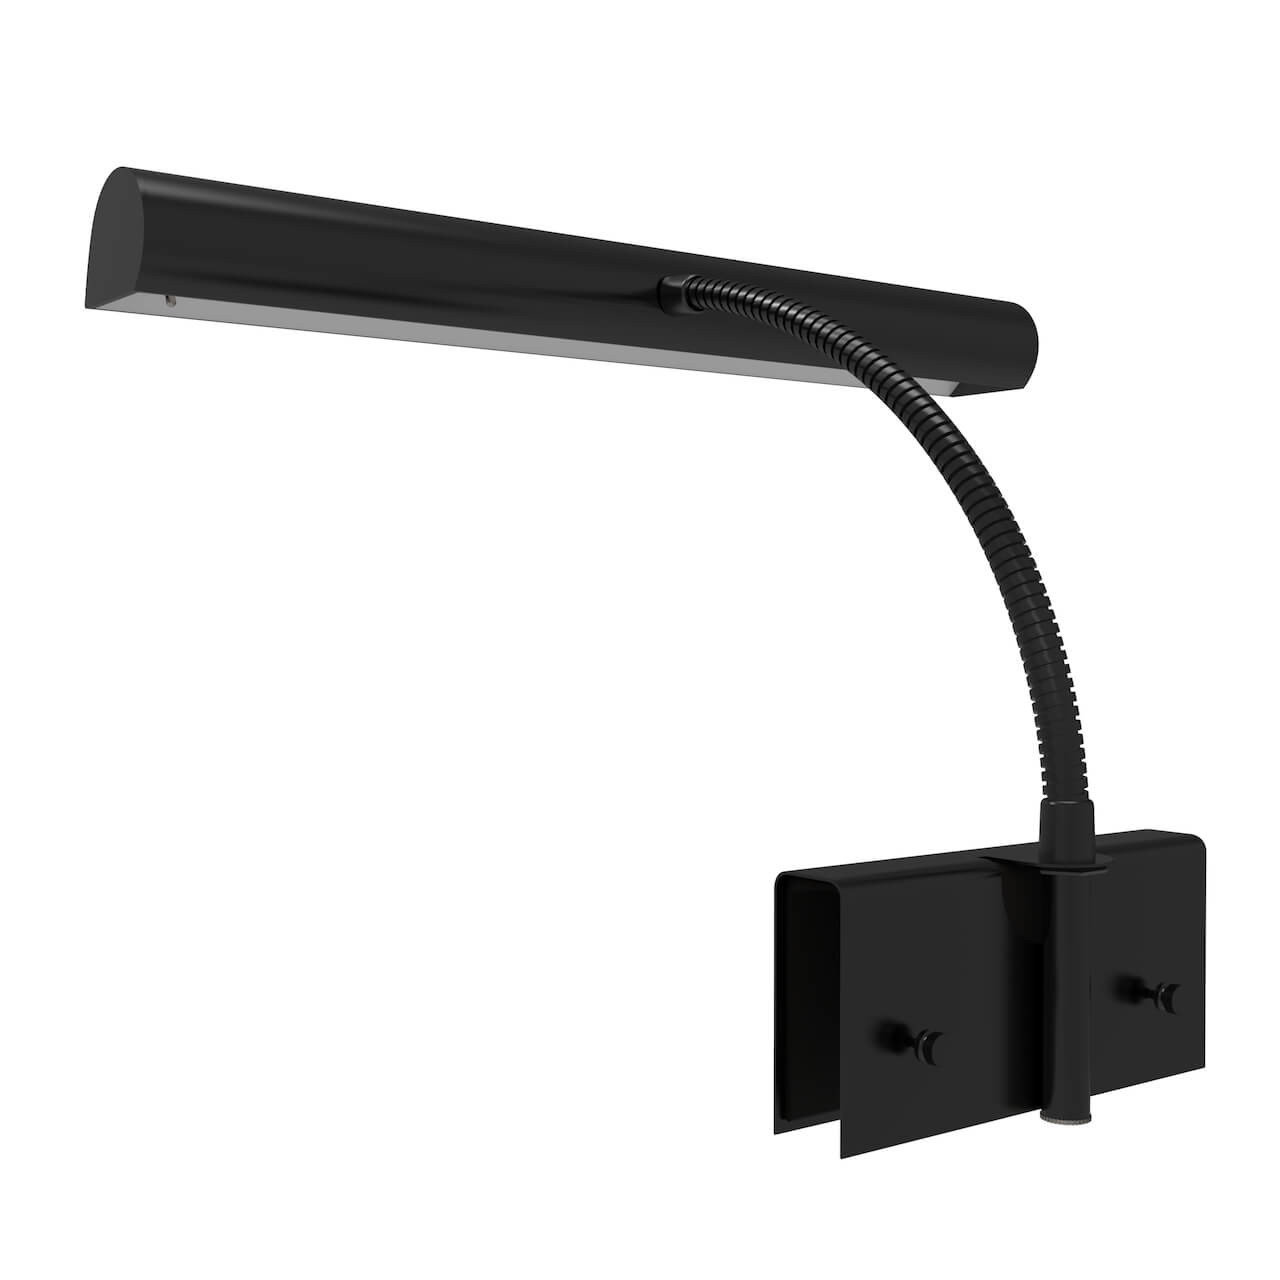 Gooseneck Piano Light Steinway that LED with fits most technology